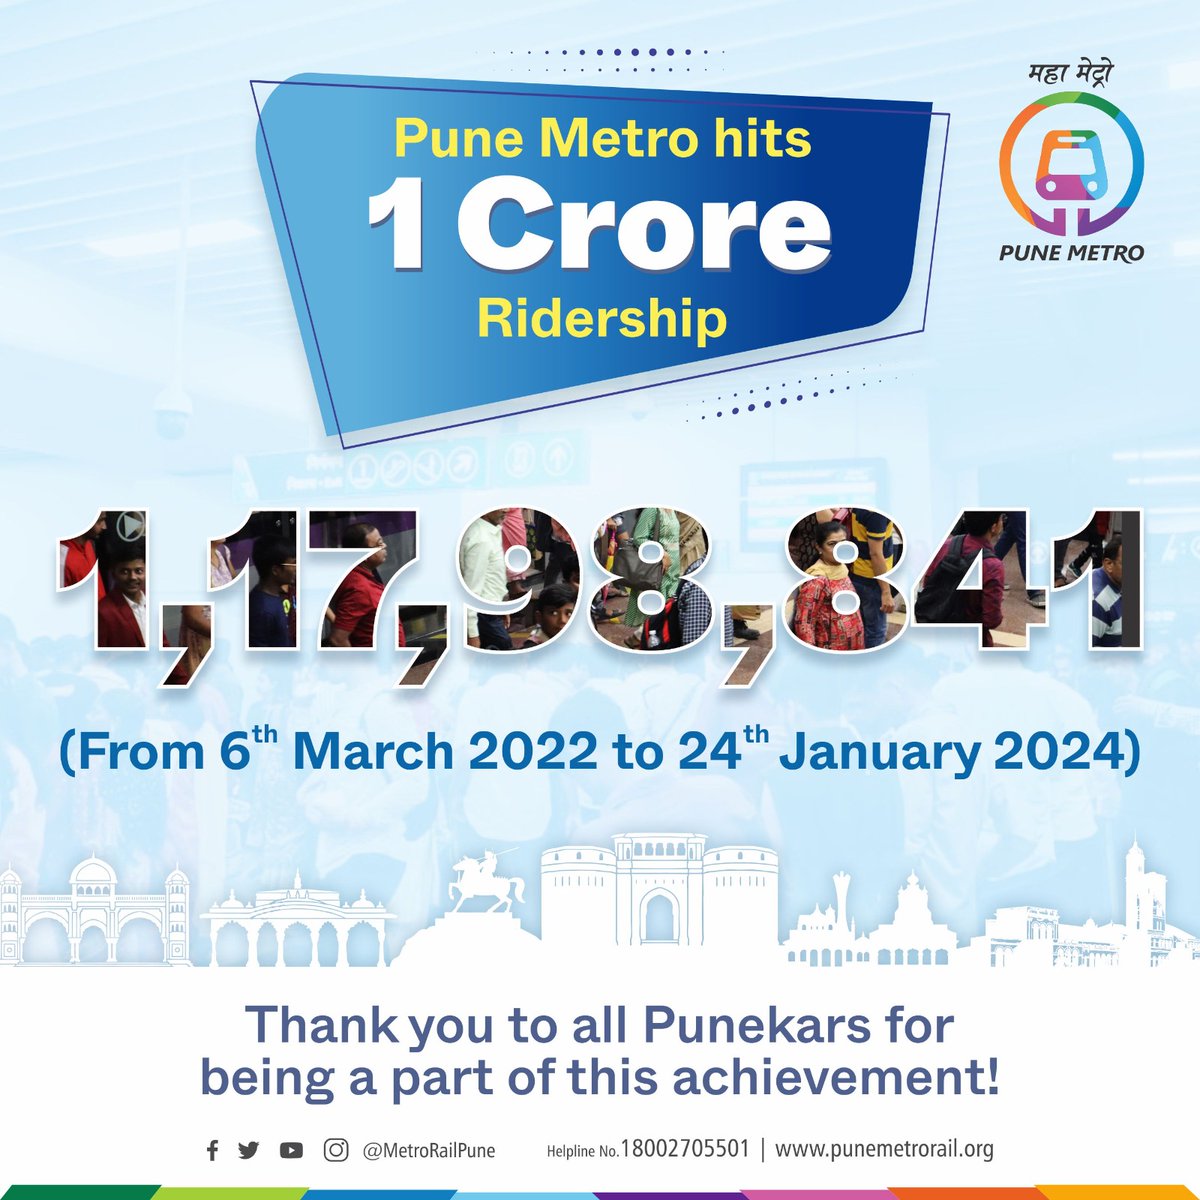 पुणे मेट्रोच्या प्रवासी संख्येने १ करोडचा टप्पा पार केला... 

We've reached a significant milestone in ridership!

Join the journey and experience the convenience of Pune Metro – a reliable and efficient travel system. 

#metromilestone #ridership #ChooseMetro #ConvenientCommute